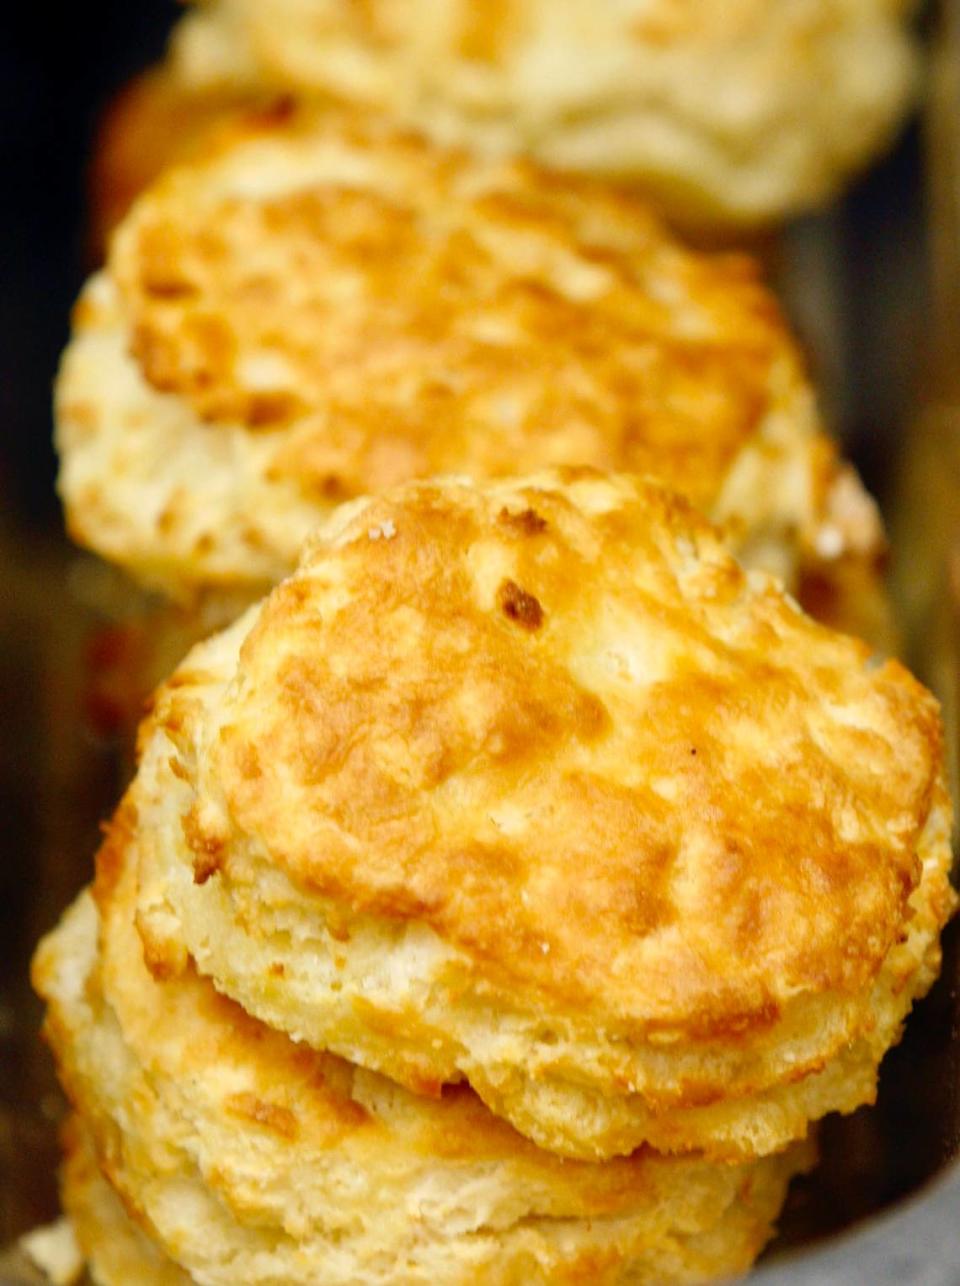 Stacks of warm fresh Rise biscuits at the south Durham, North Carolina location. The shop makes 800-1,000 biscuits every morning. Harry Lynch/Raleigh News & Observer archives